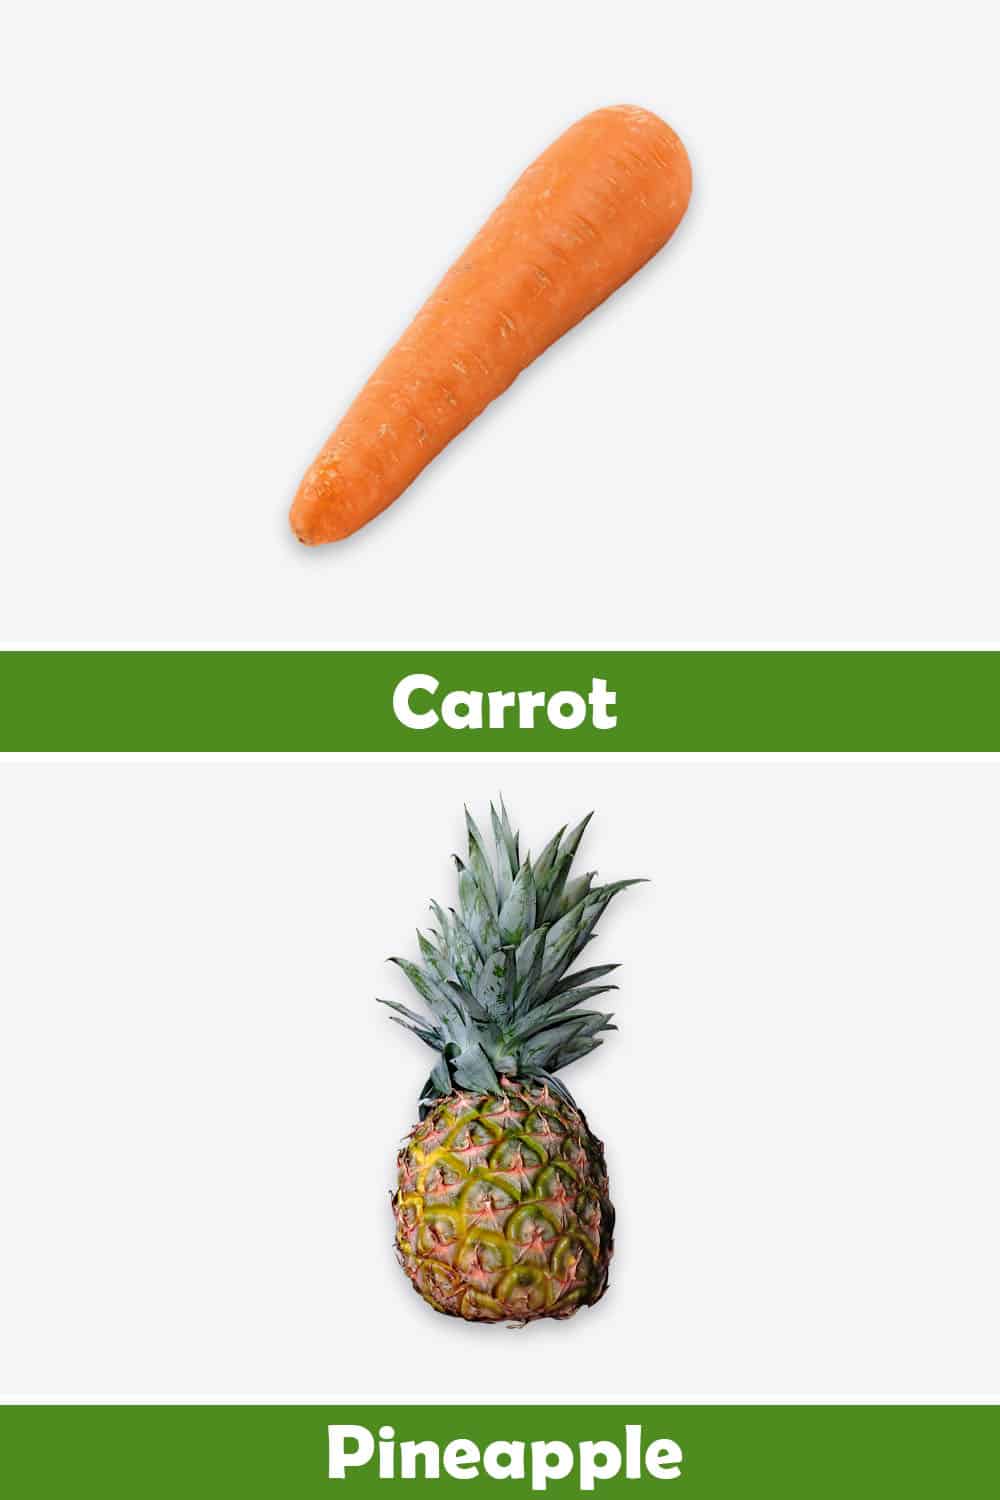 CARROT AND PINEAPPLE